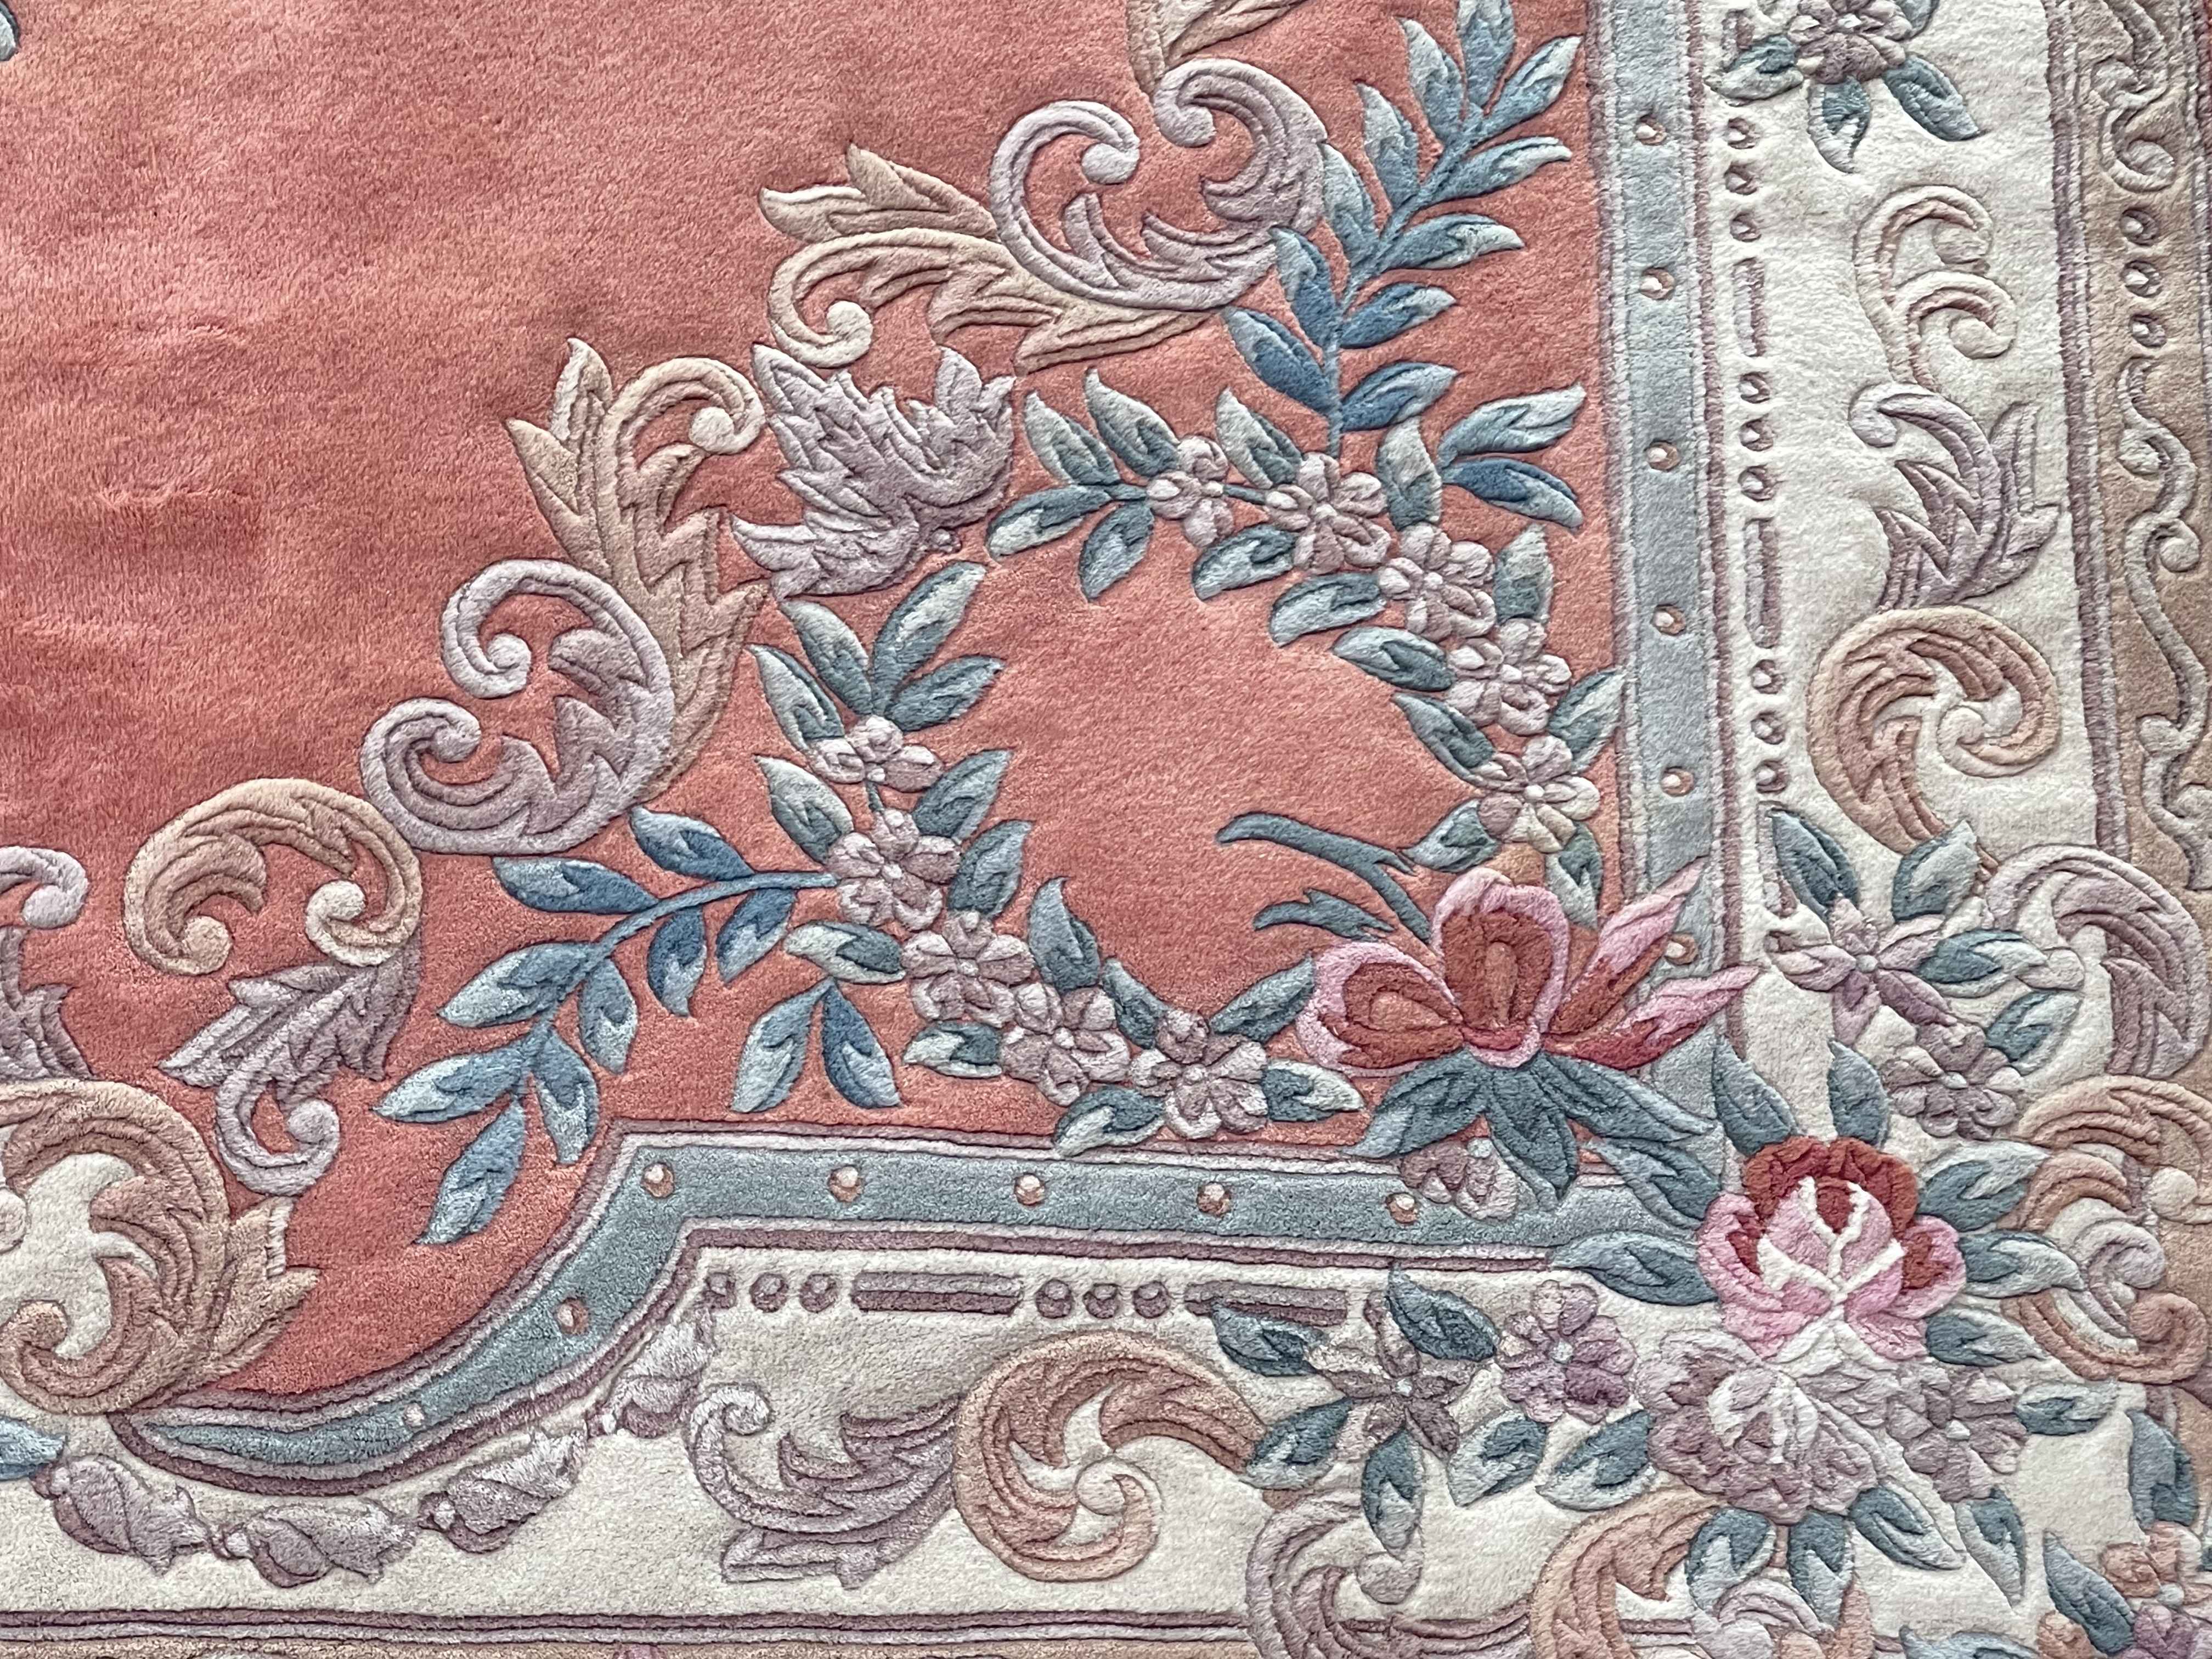 Floral patterned Chinese carpet, 3.80 by 2.78. - Image 2 of 2